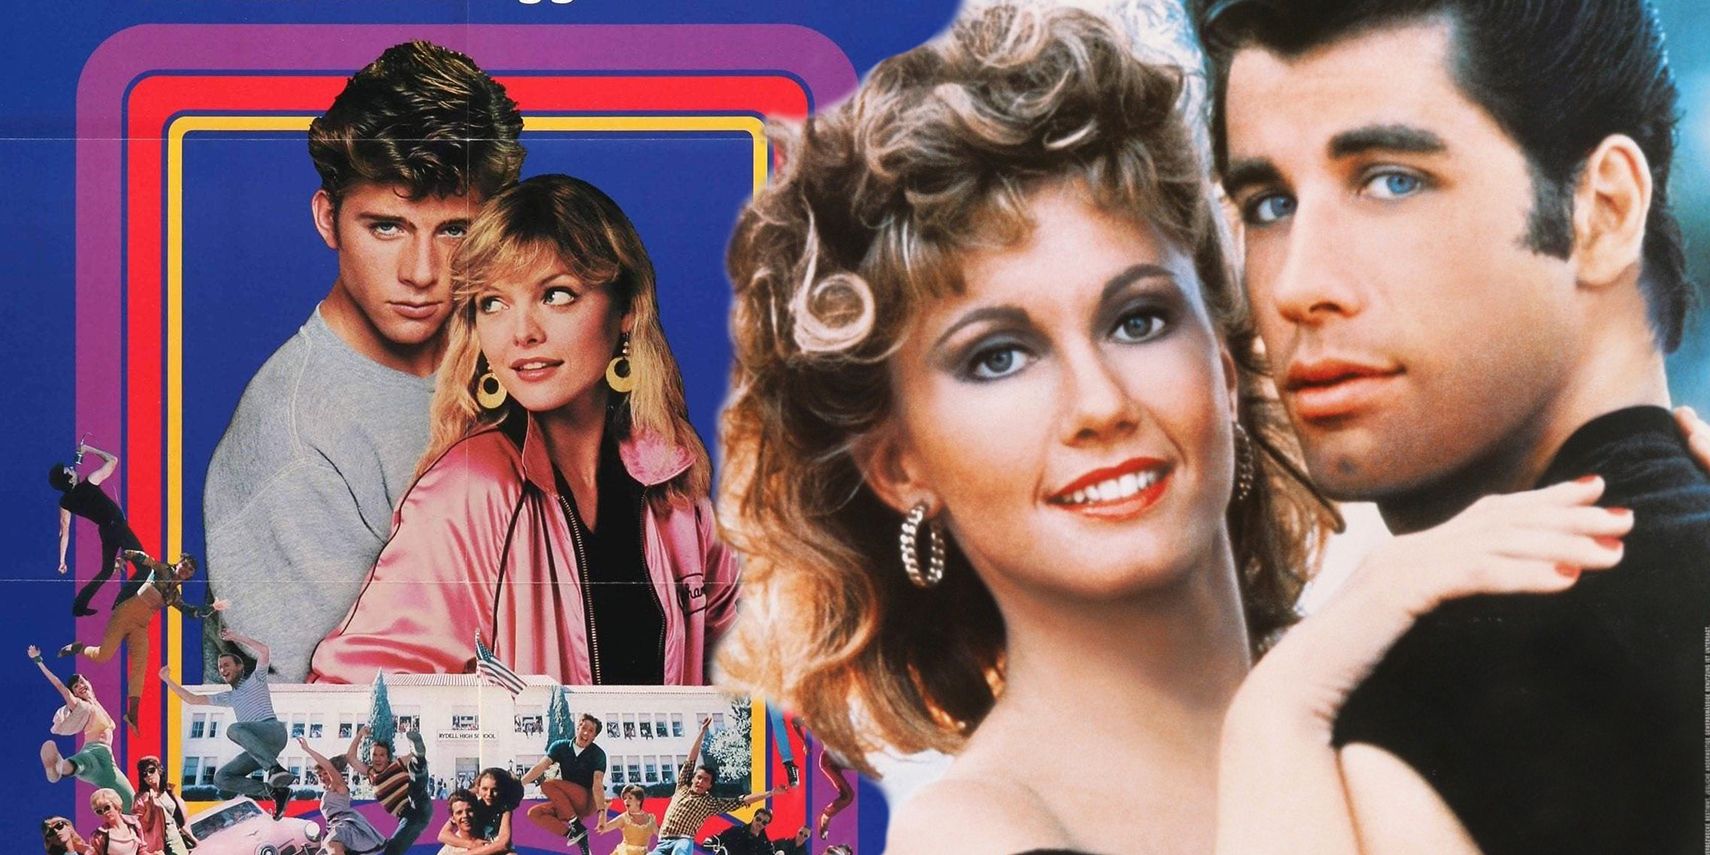 Stephanie and Michael in Grease 2 and Sandy and Danny in Grease 1